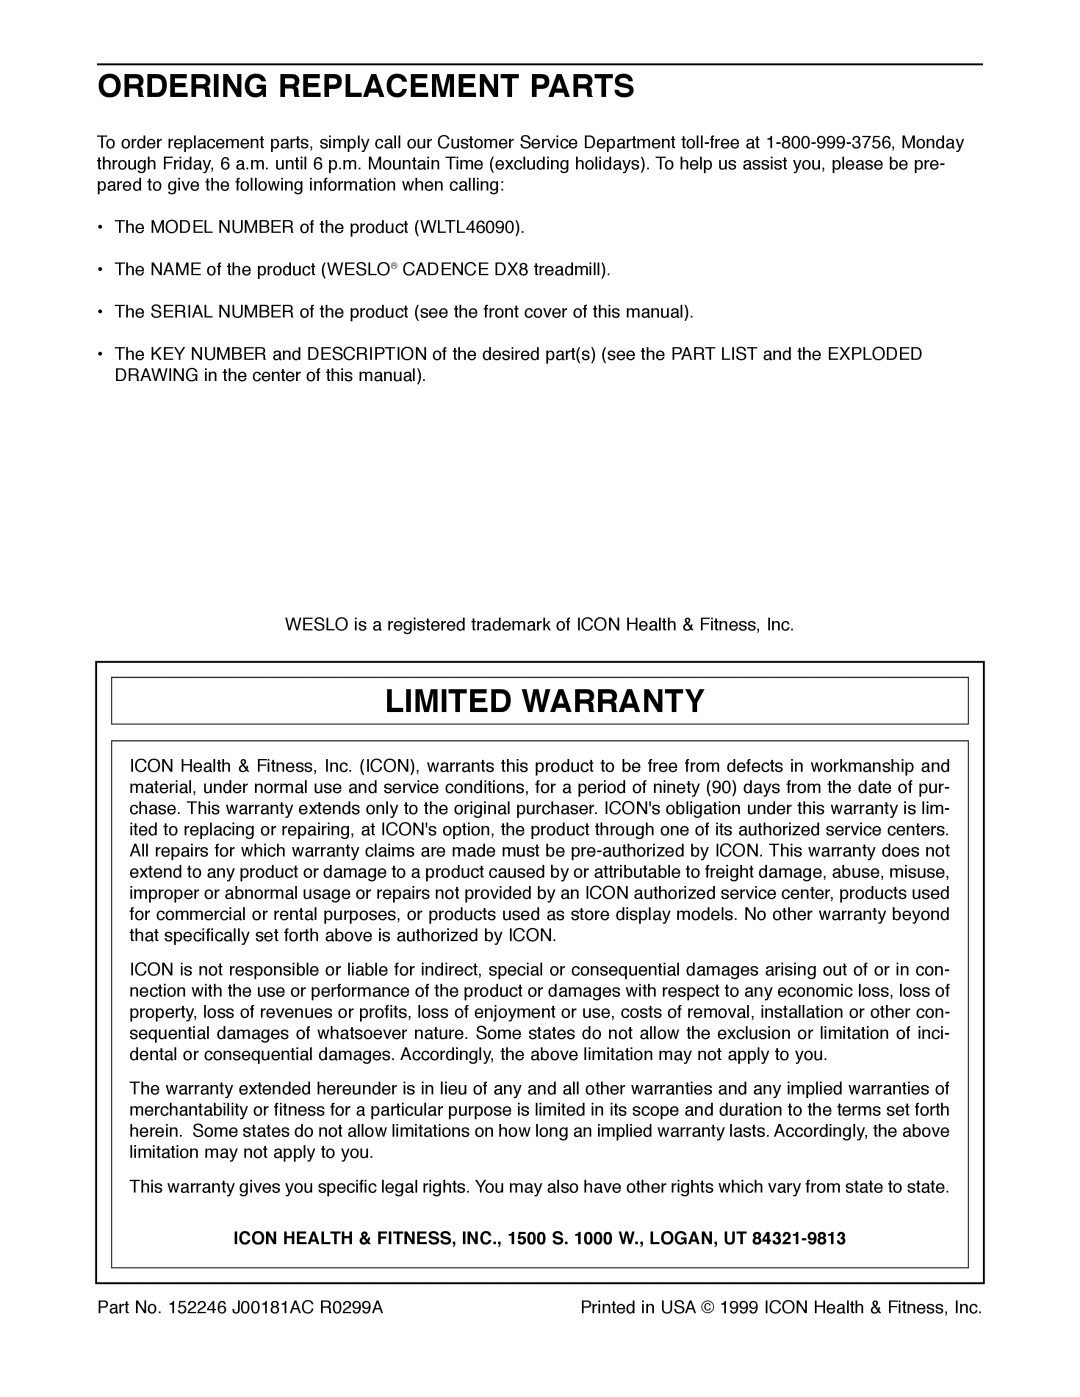 Weslo WLTL46090 user manual Ordering Replacement Parts, Limited Warranty, Icon Health & FITNESS, INC., 1500 S W., LOGAN, UT 